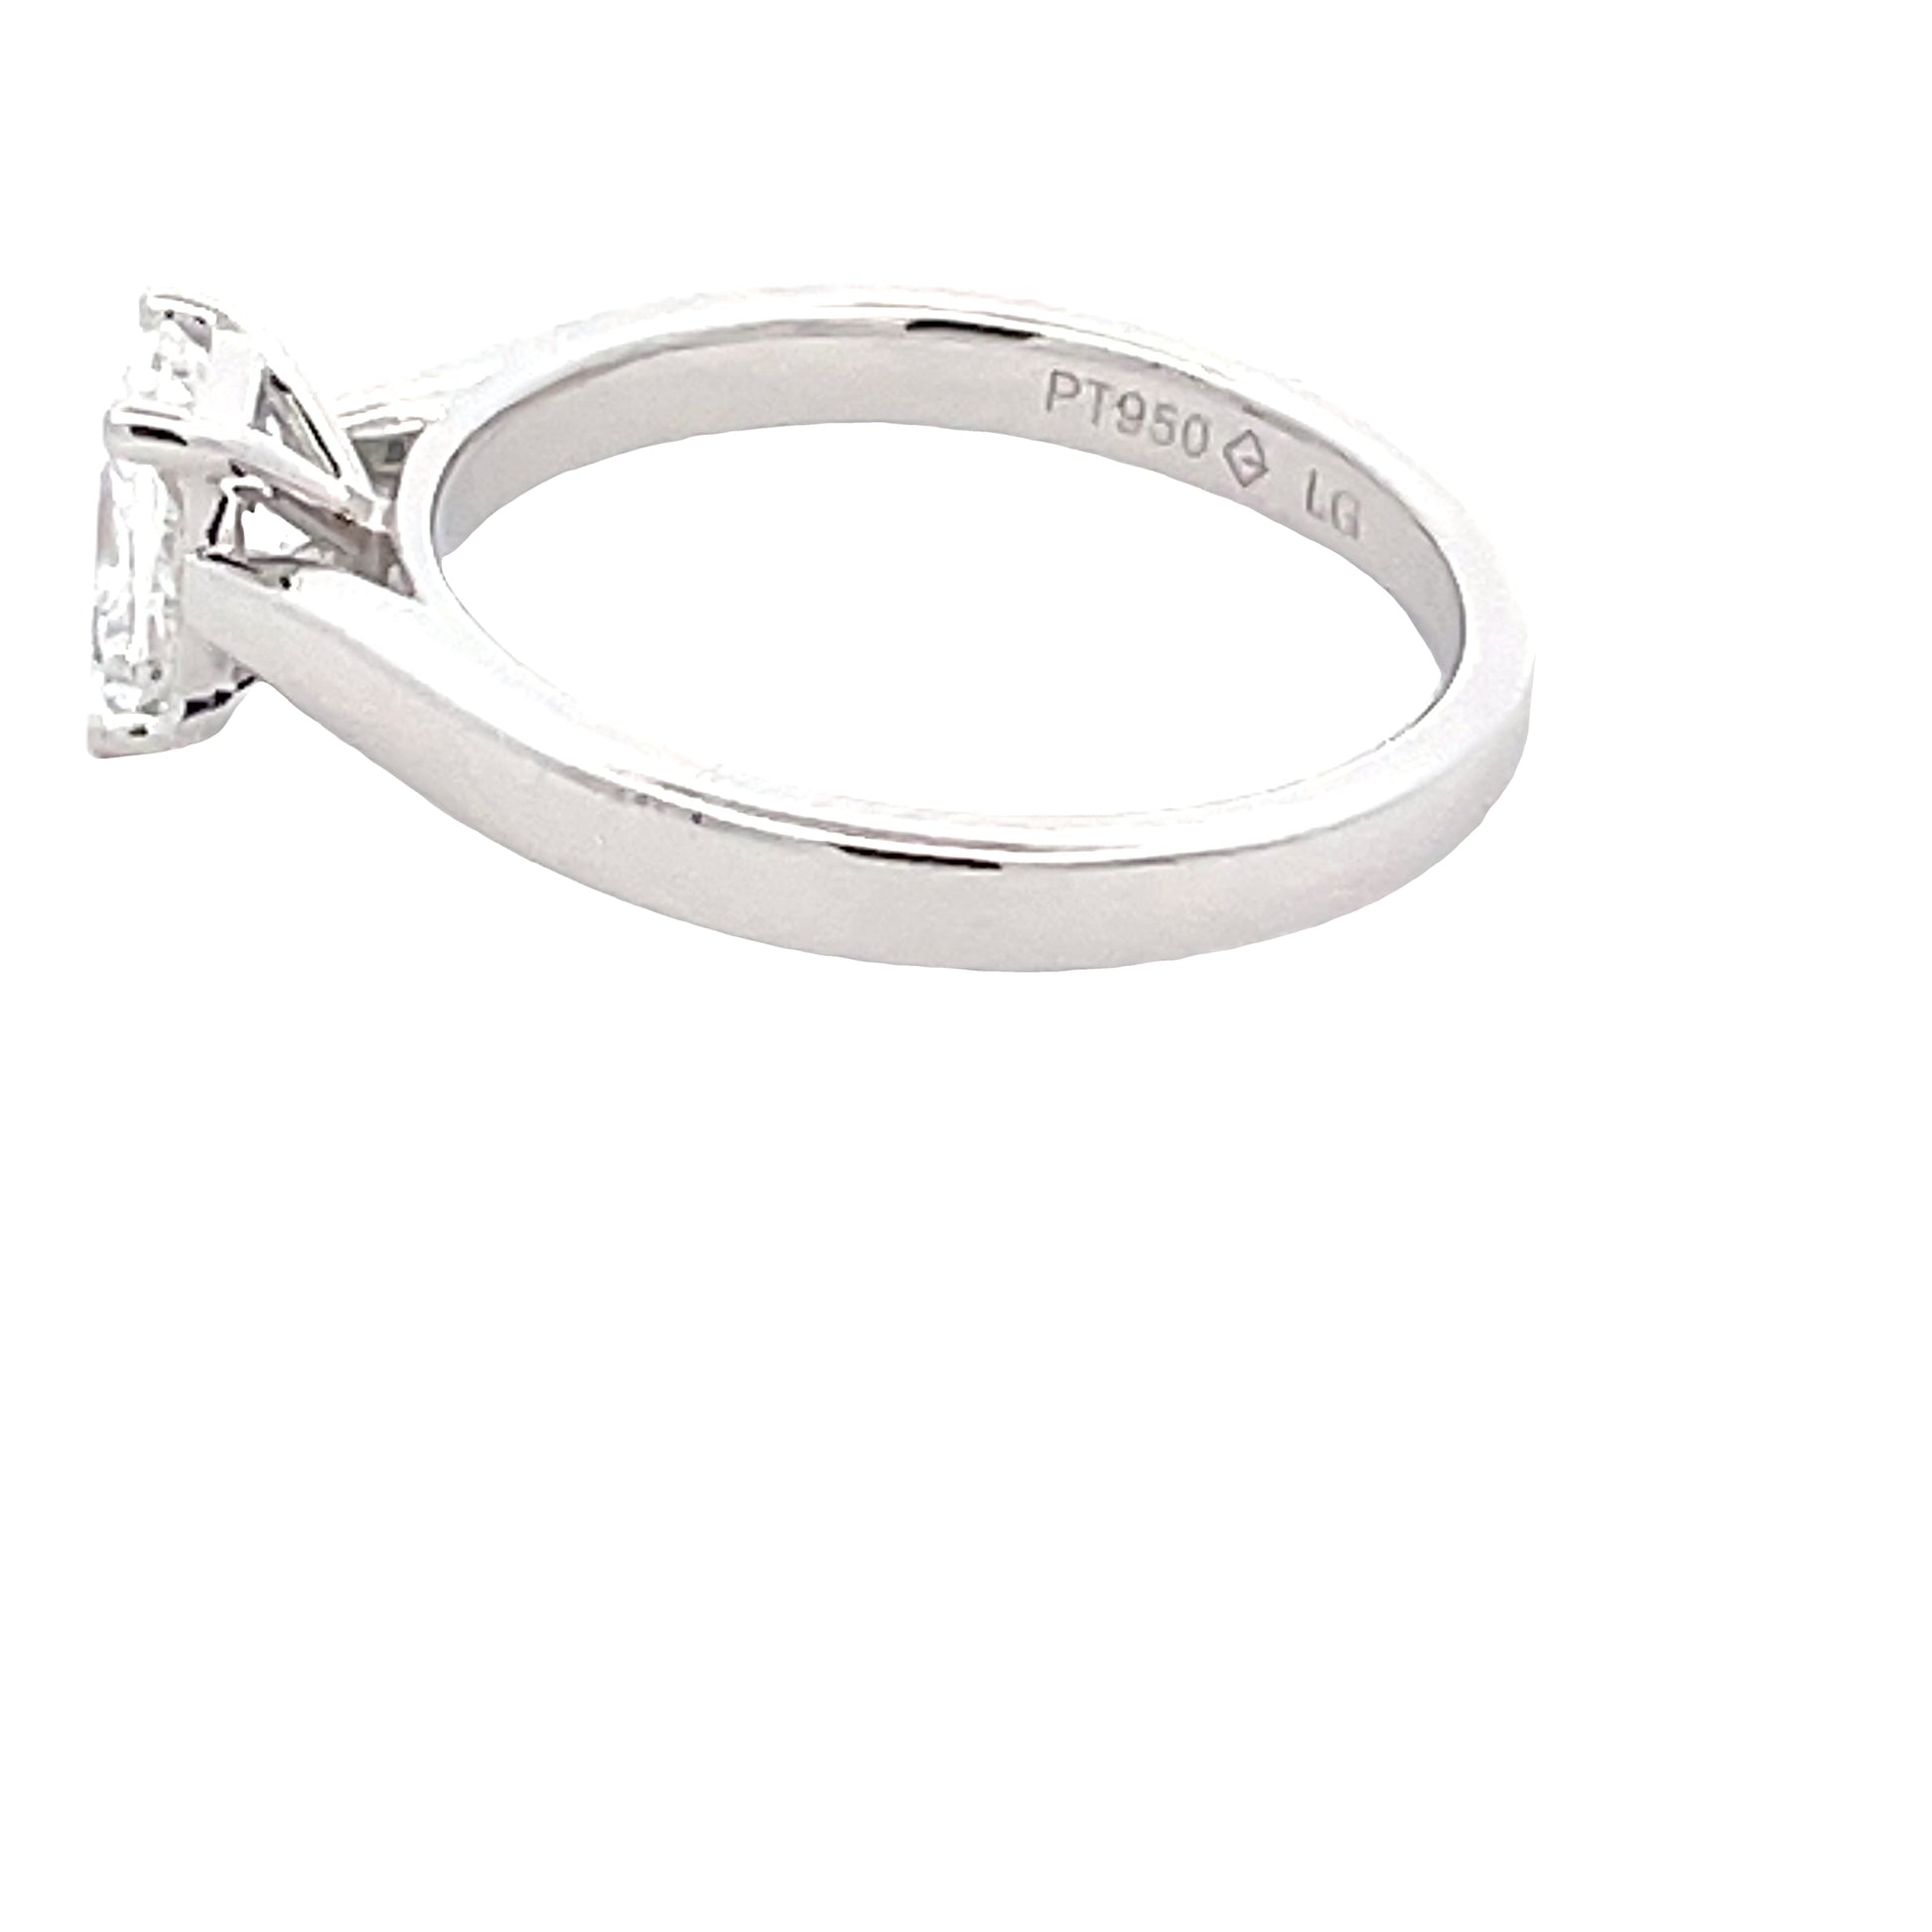 Lab Grown Radiant Cut Diamond Solitaire Ring - 0.74cts  Gardiner Brothers   